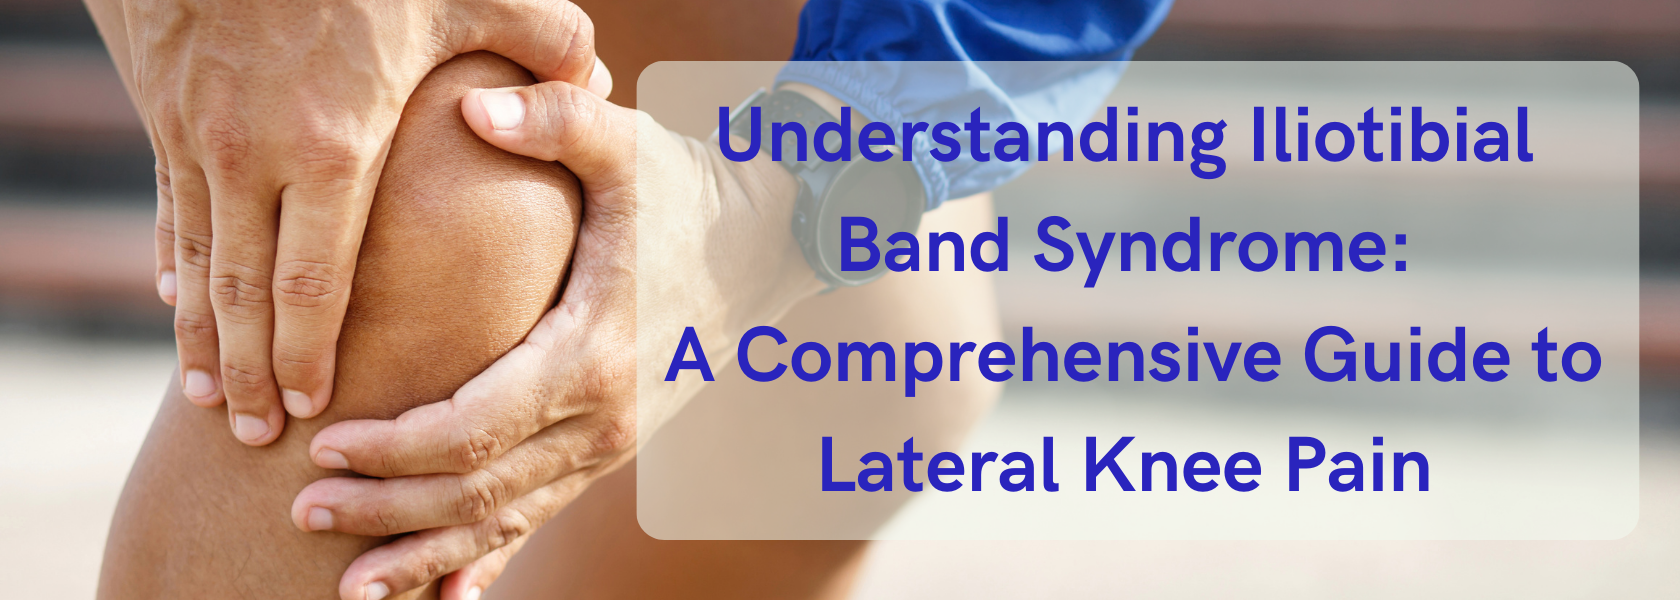 Understanding Iliotibial Band Syndrome - Canberra Physiotherapy